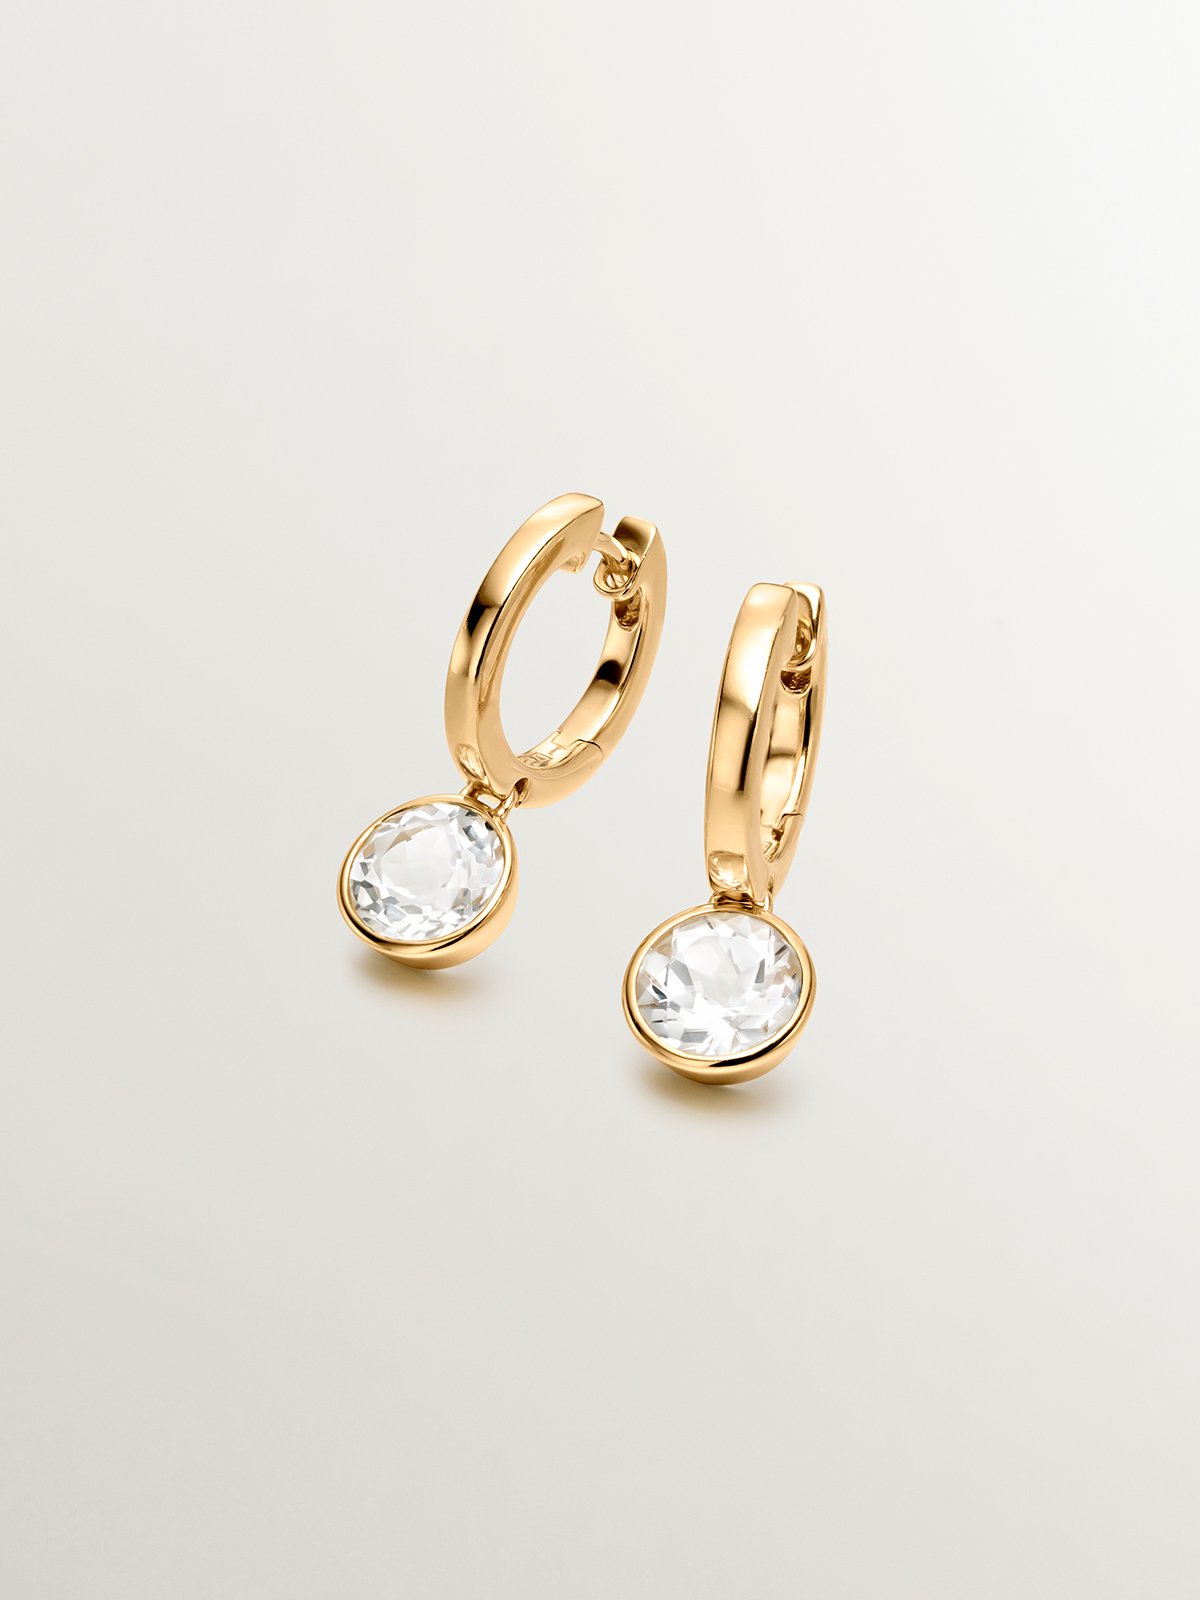 925 silver hoop earrings bathed in 18K yellow gold with white topaz